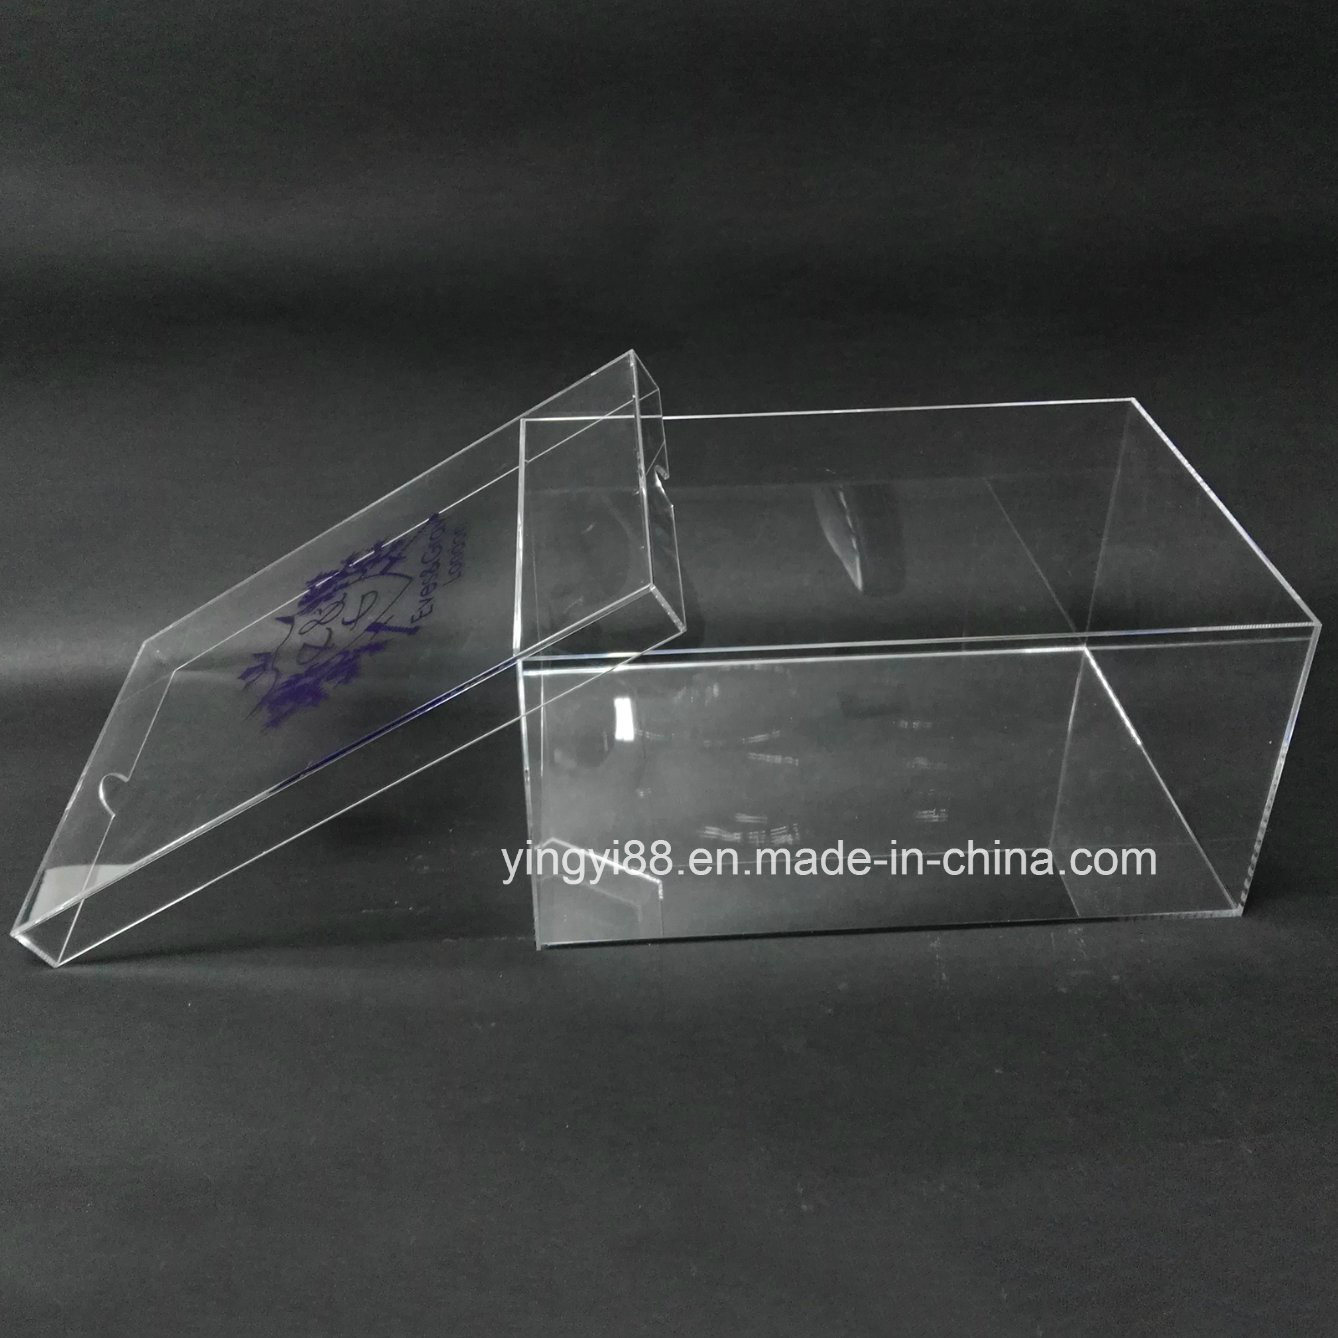 Handmade Trasparent Clear Acrylic Shoe Box with Lid